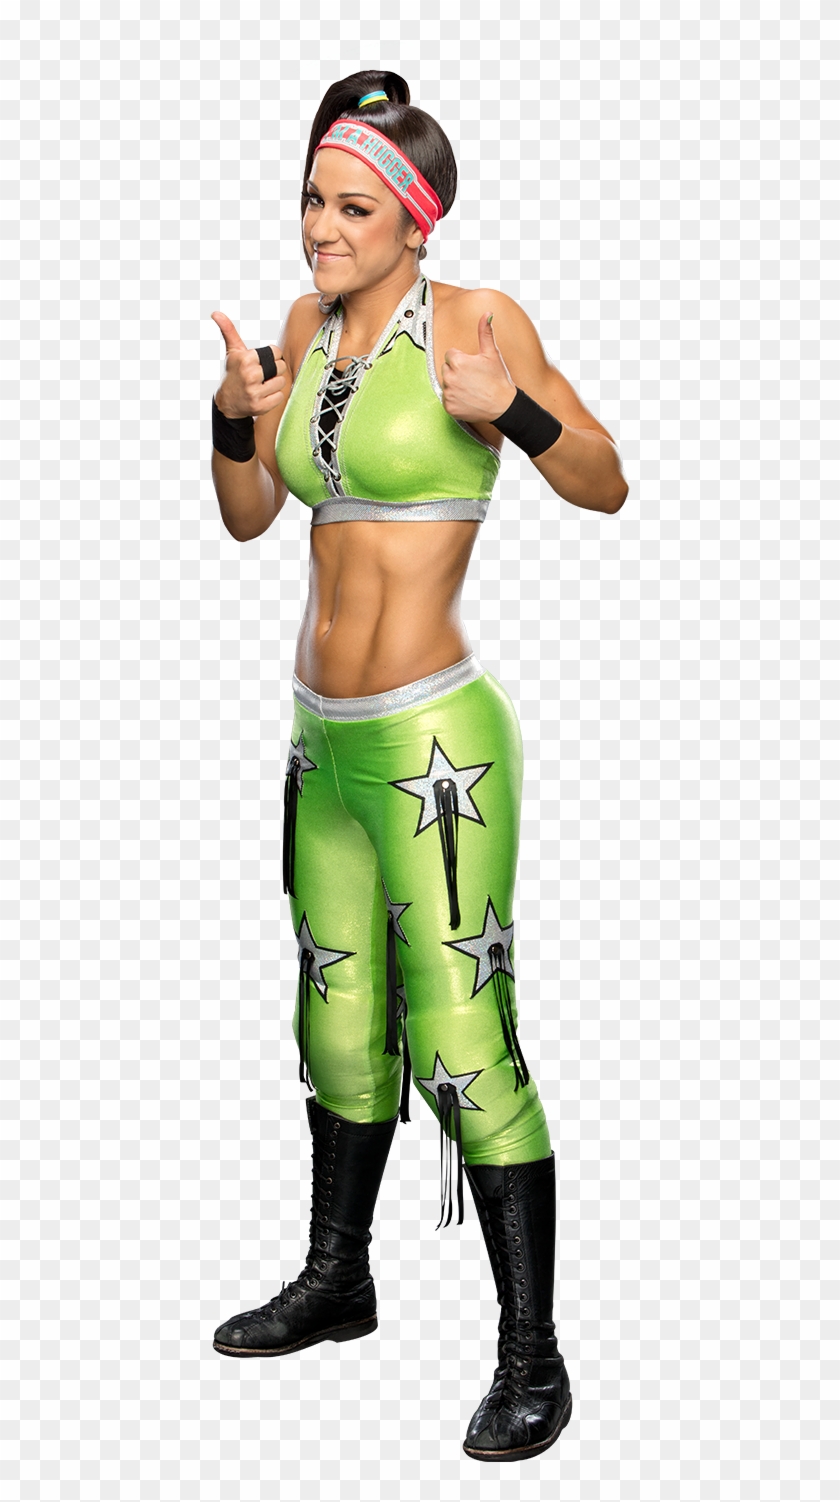 Wwe Raw Superstar Bayley's Official Profile, Featuring - Wwe Bayley Attire Clipart #1567943